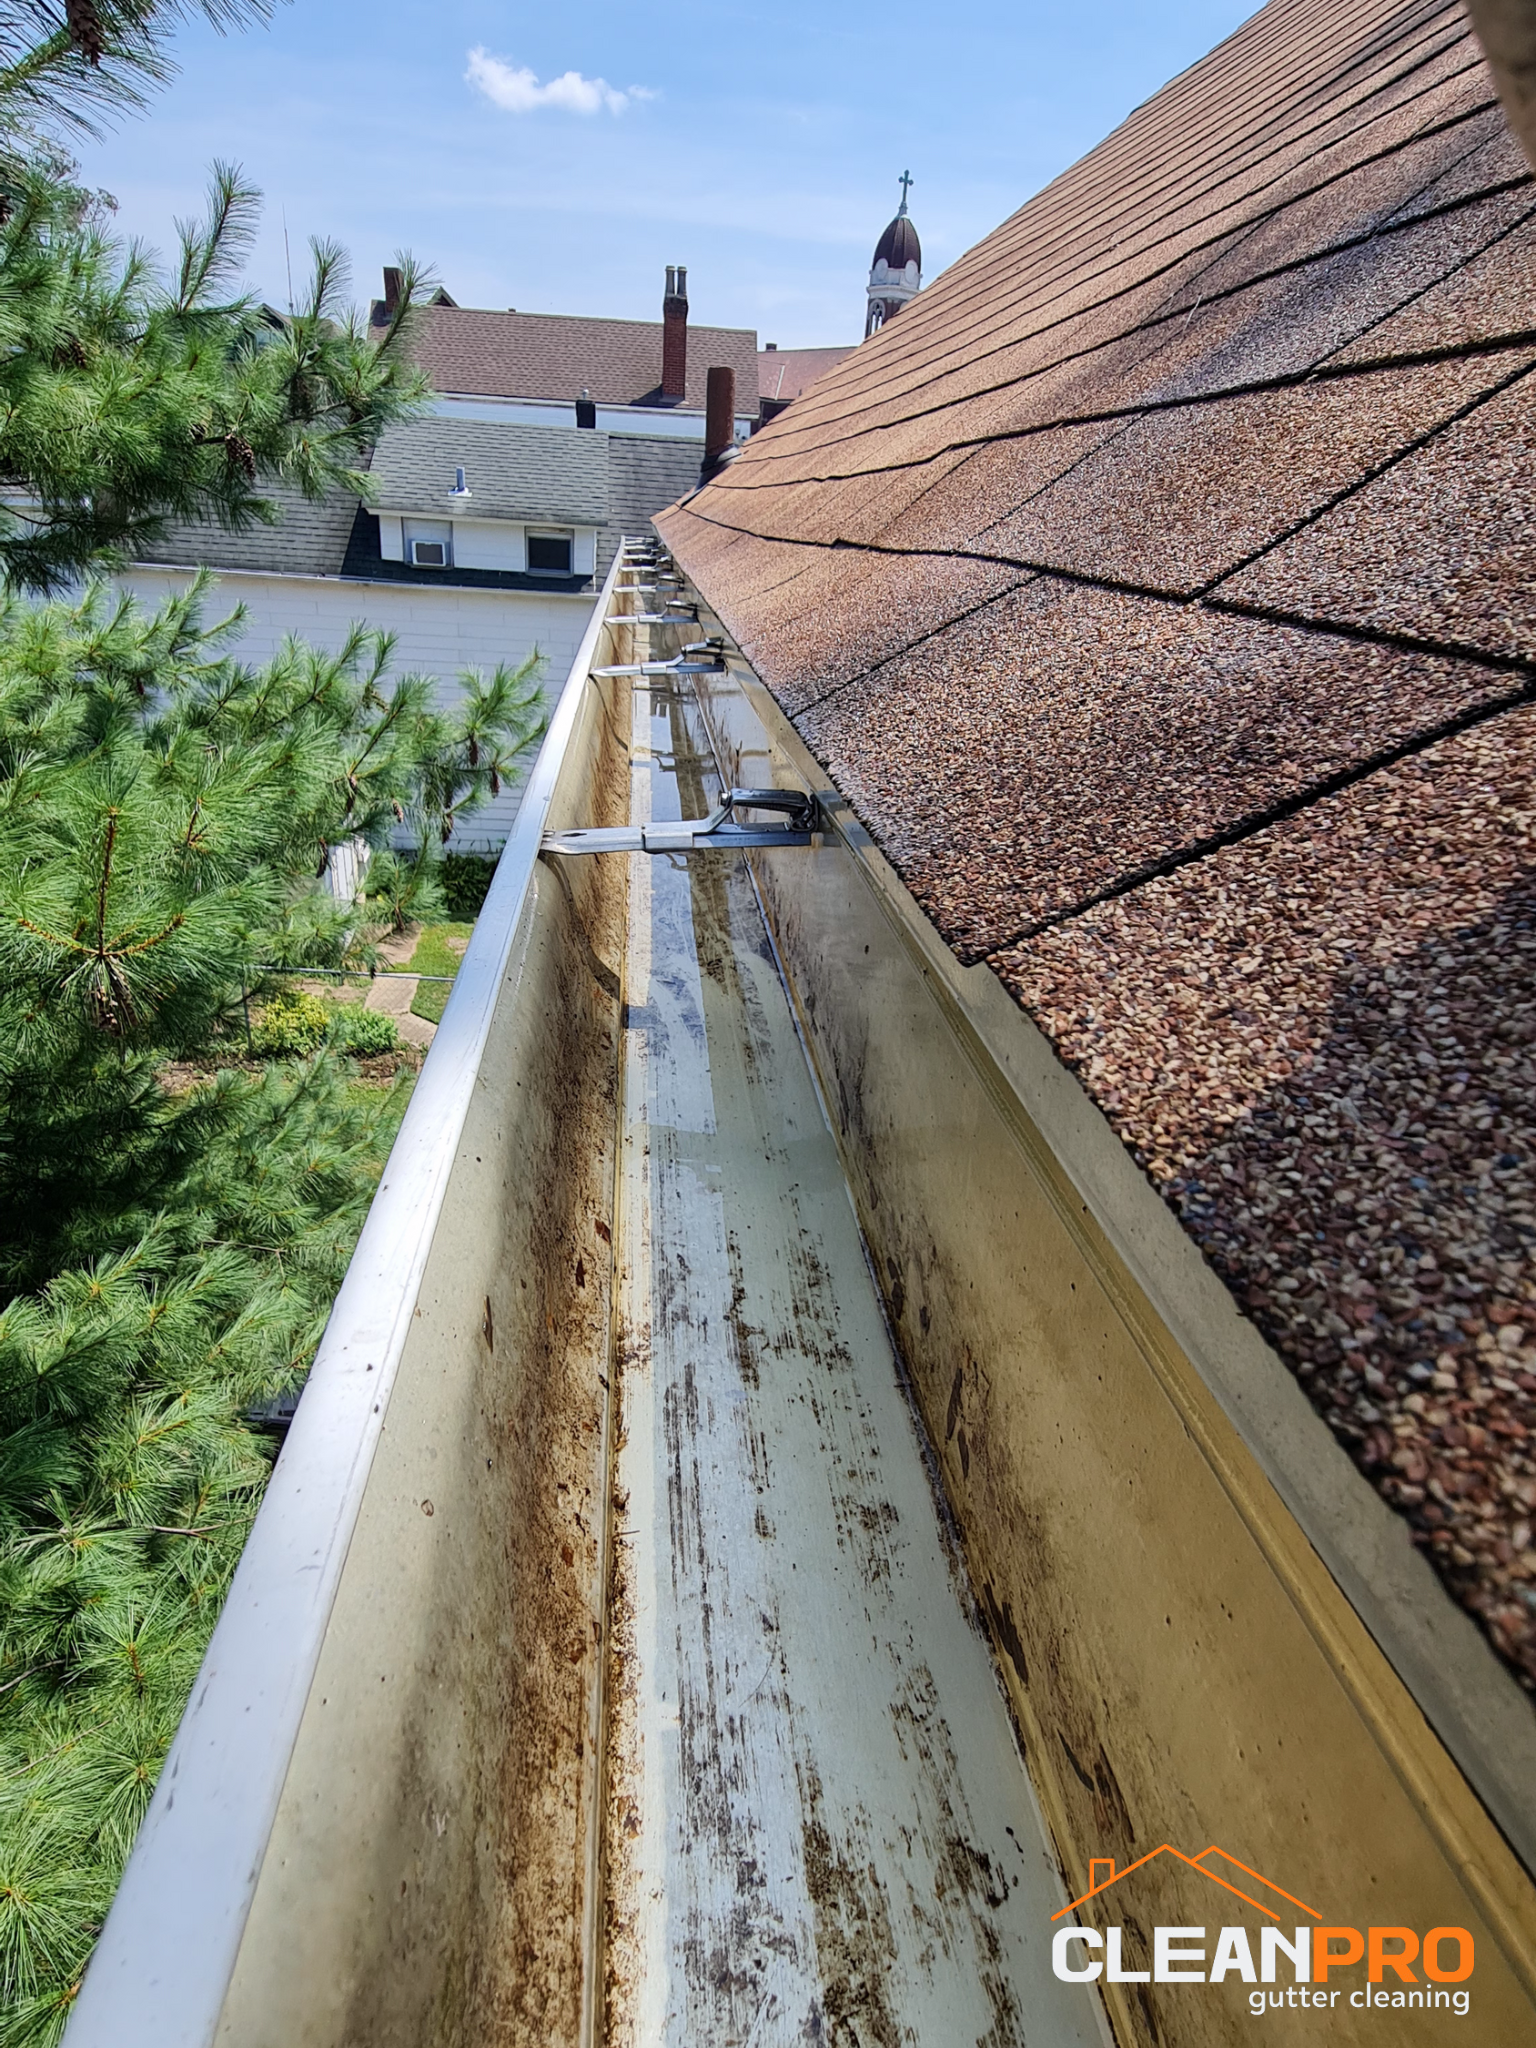 Best Gutter Cleaning Service in Athens